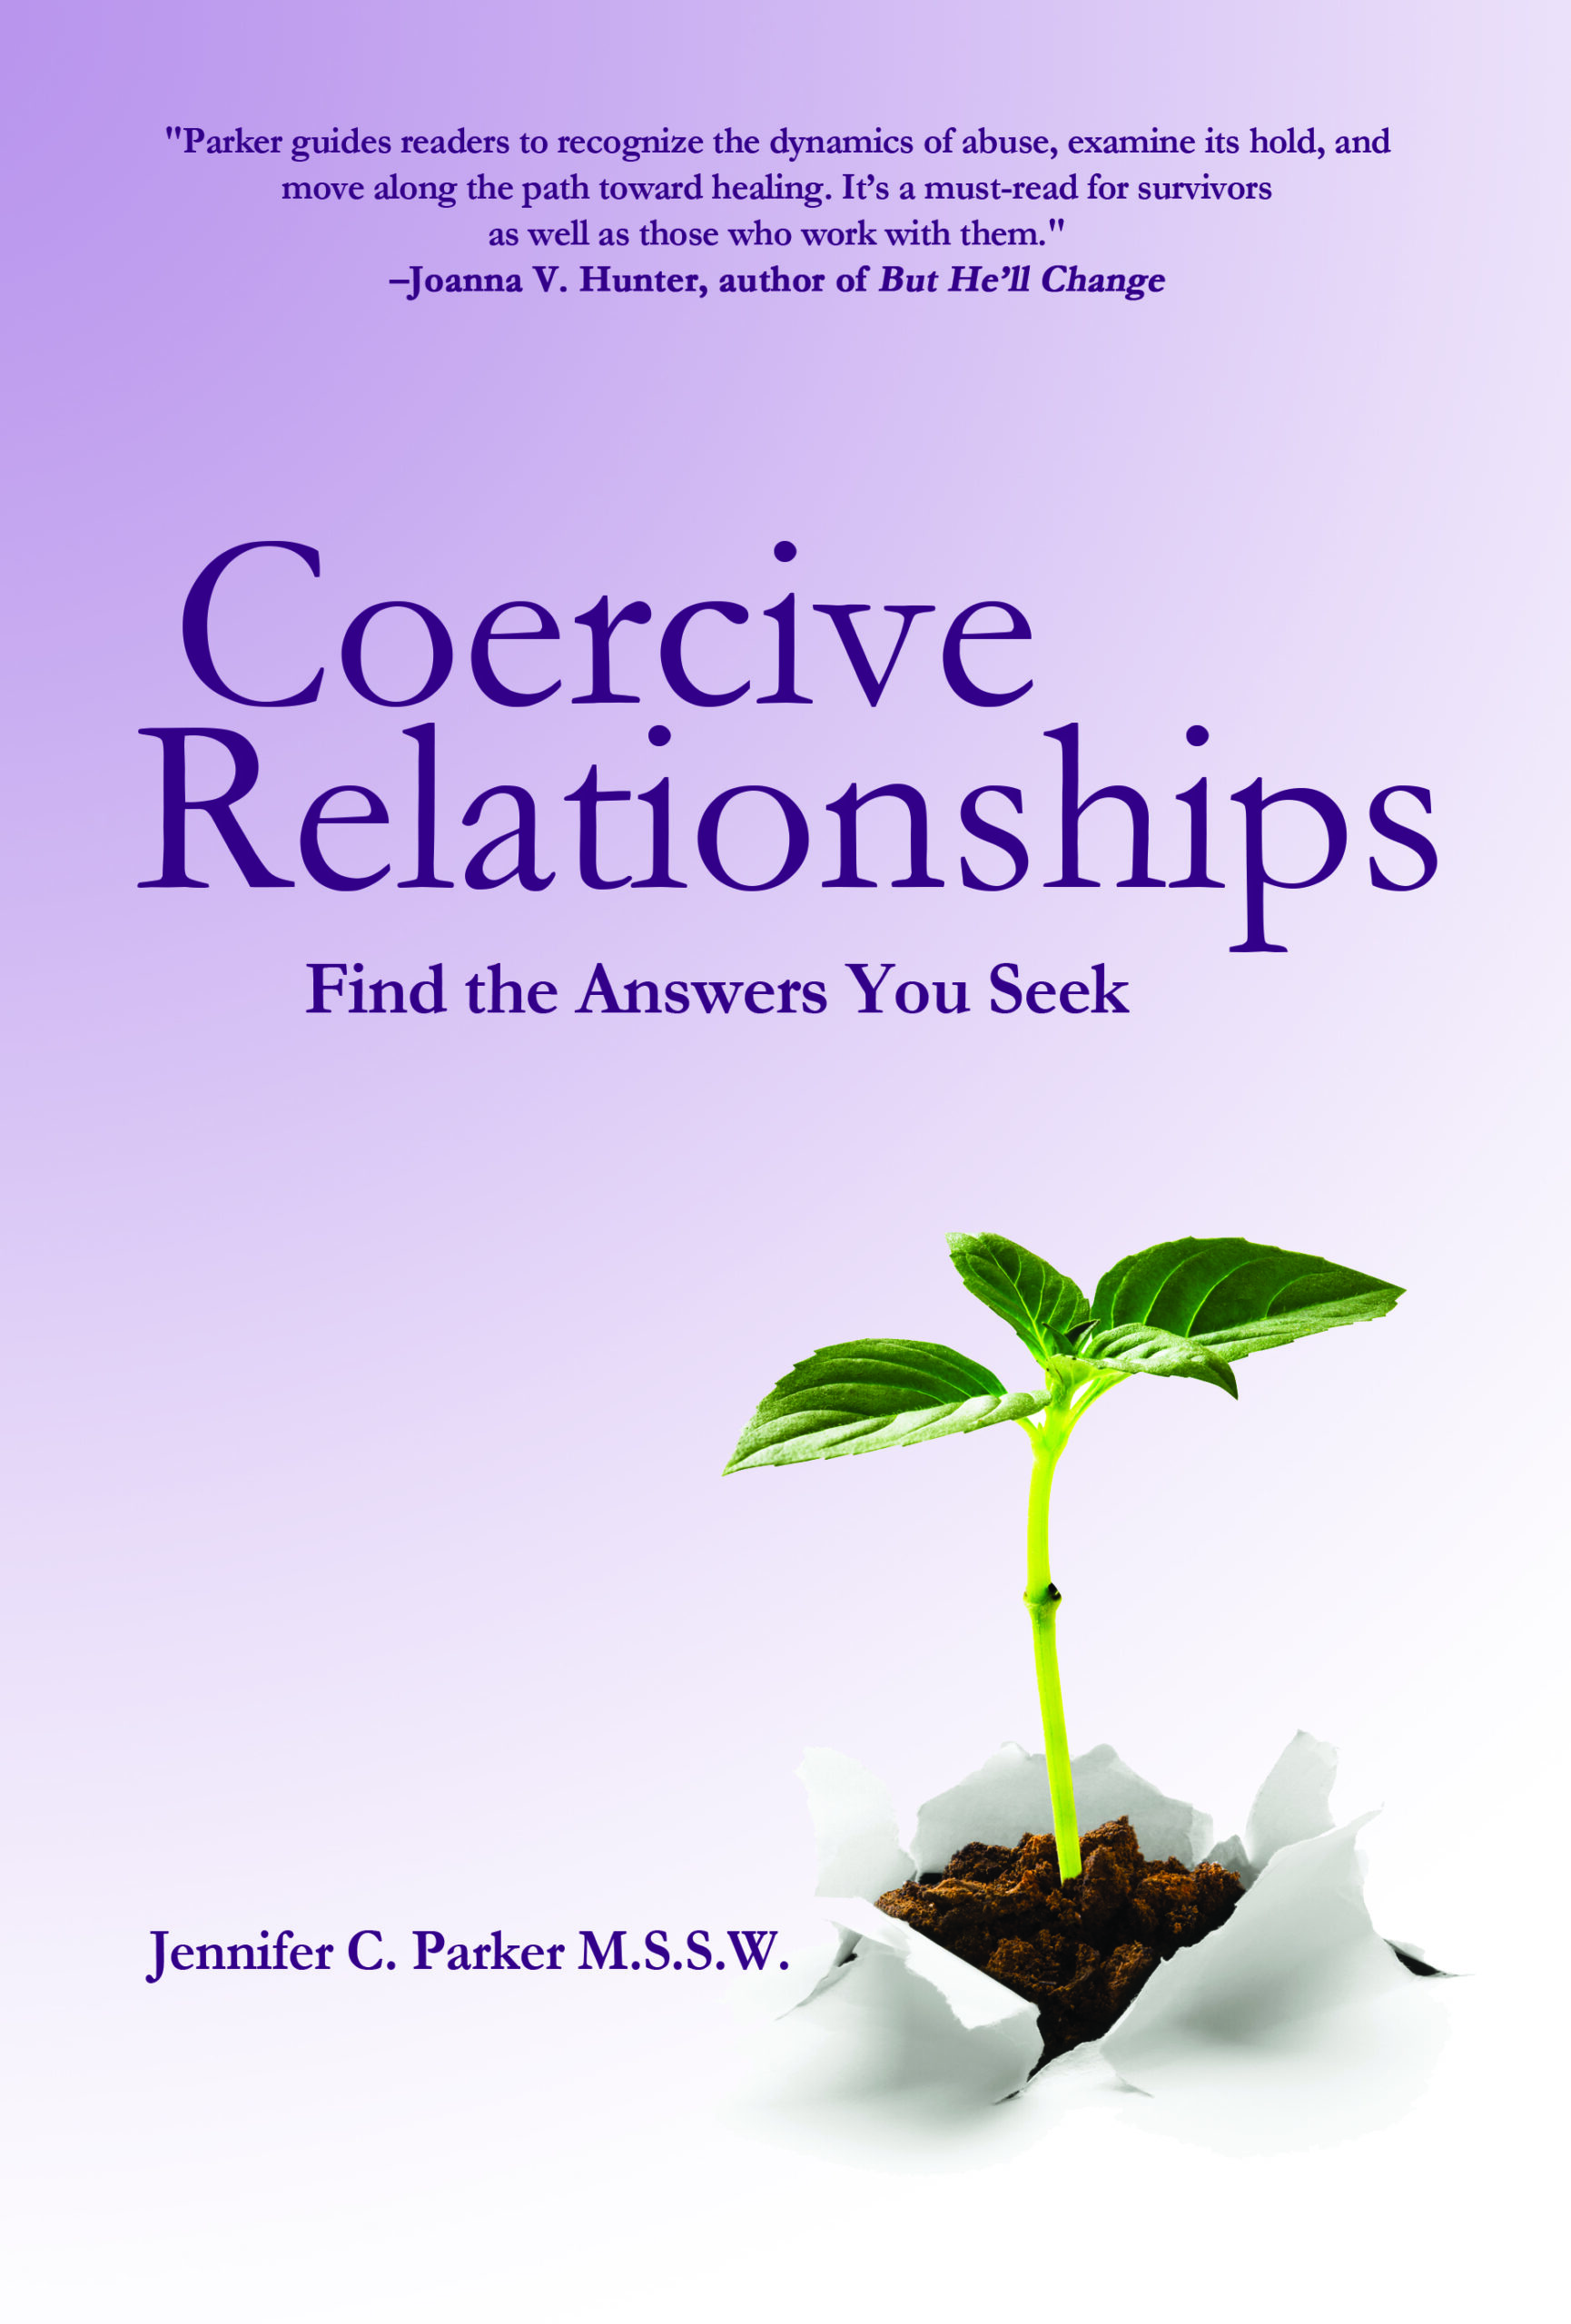 FREE: Coercive Relationships: Find the Answers You Seek by Jennifer C. Parker, MSSW